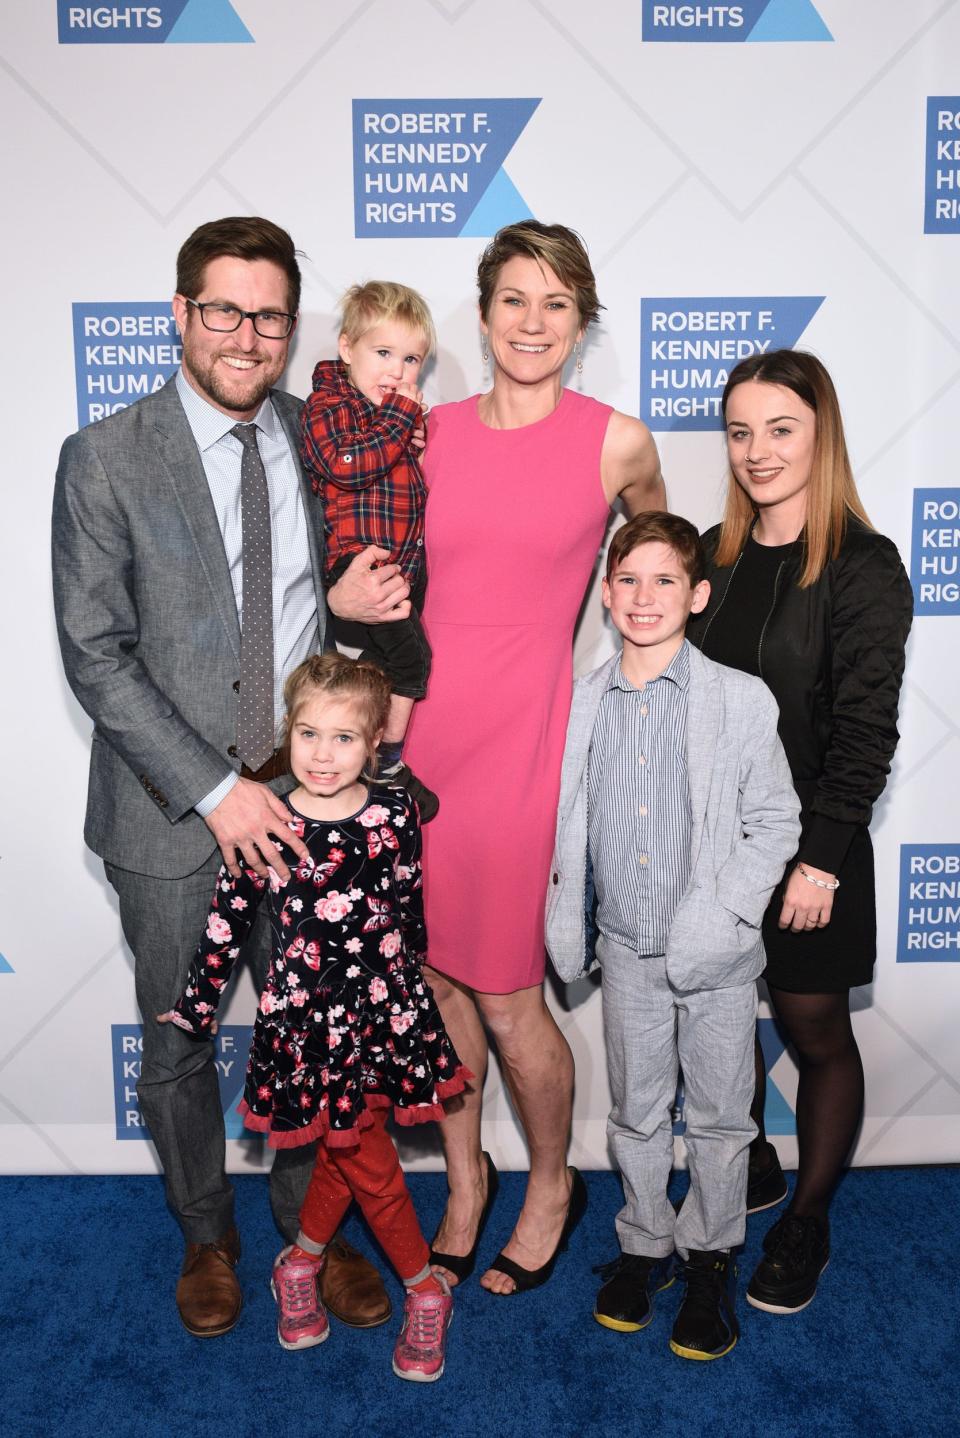 David McKean, Maeve Kennedy Townsend McKean, and their family attend a gala in New York City in 2019.